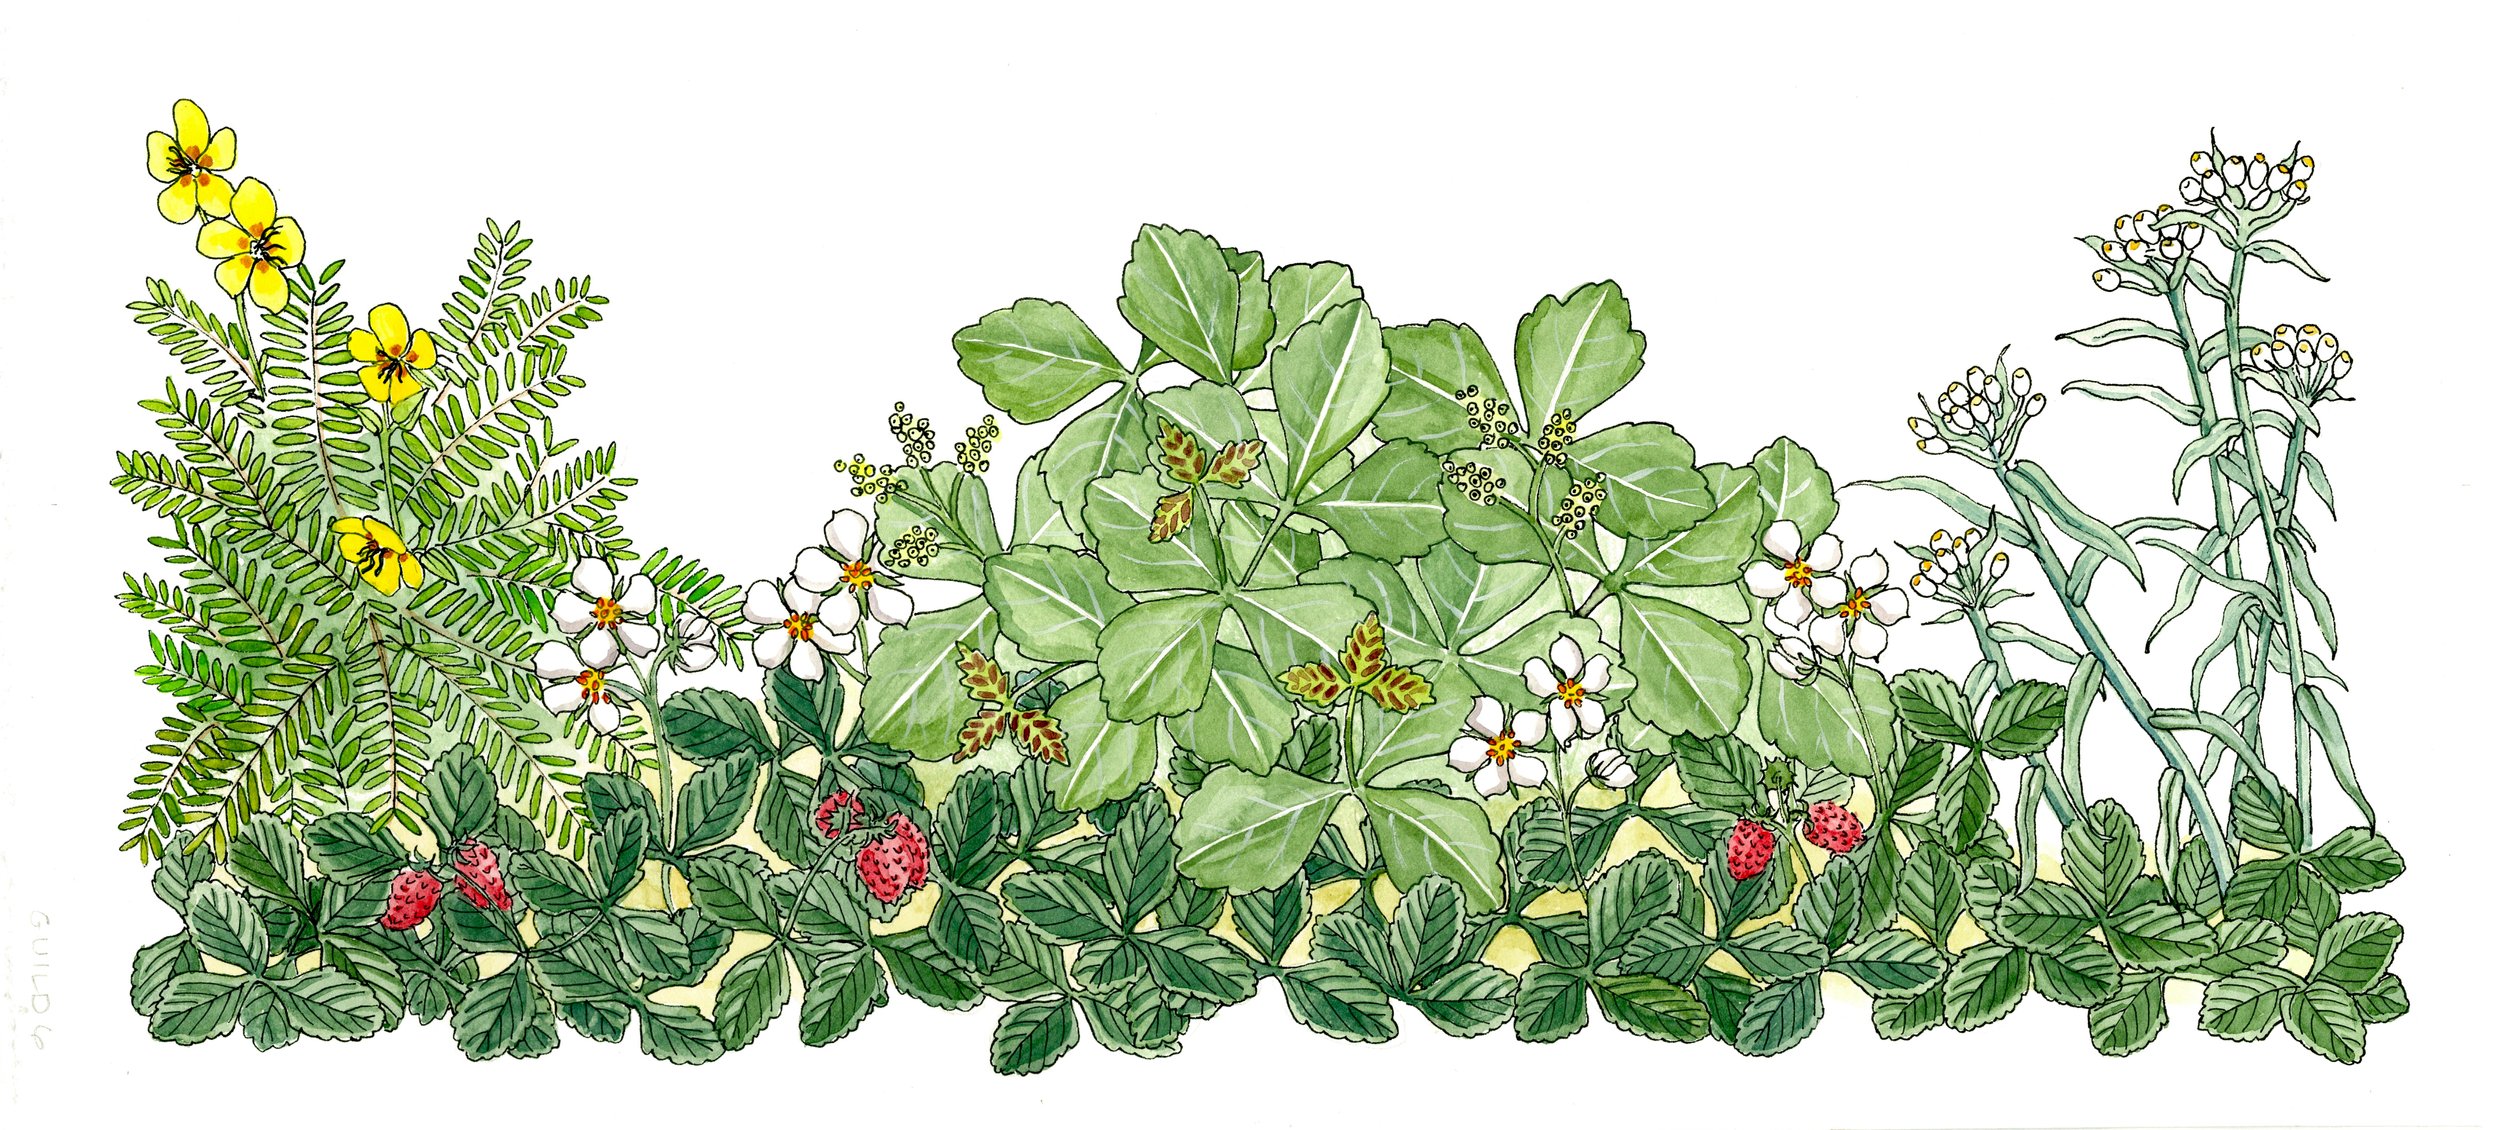 Inside illustration in Native Ground Covers